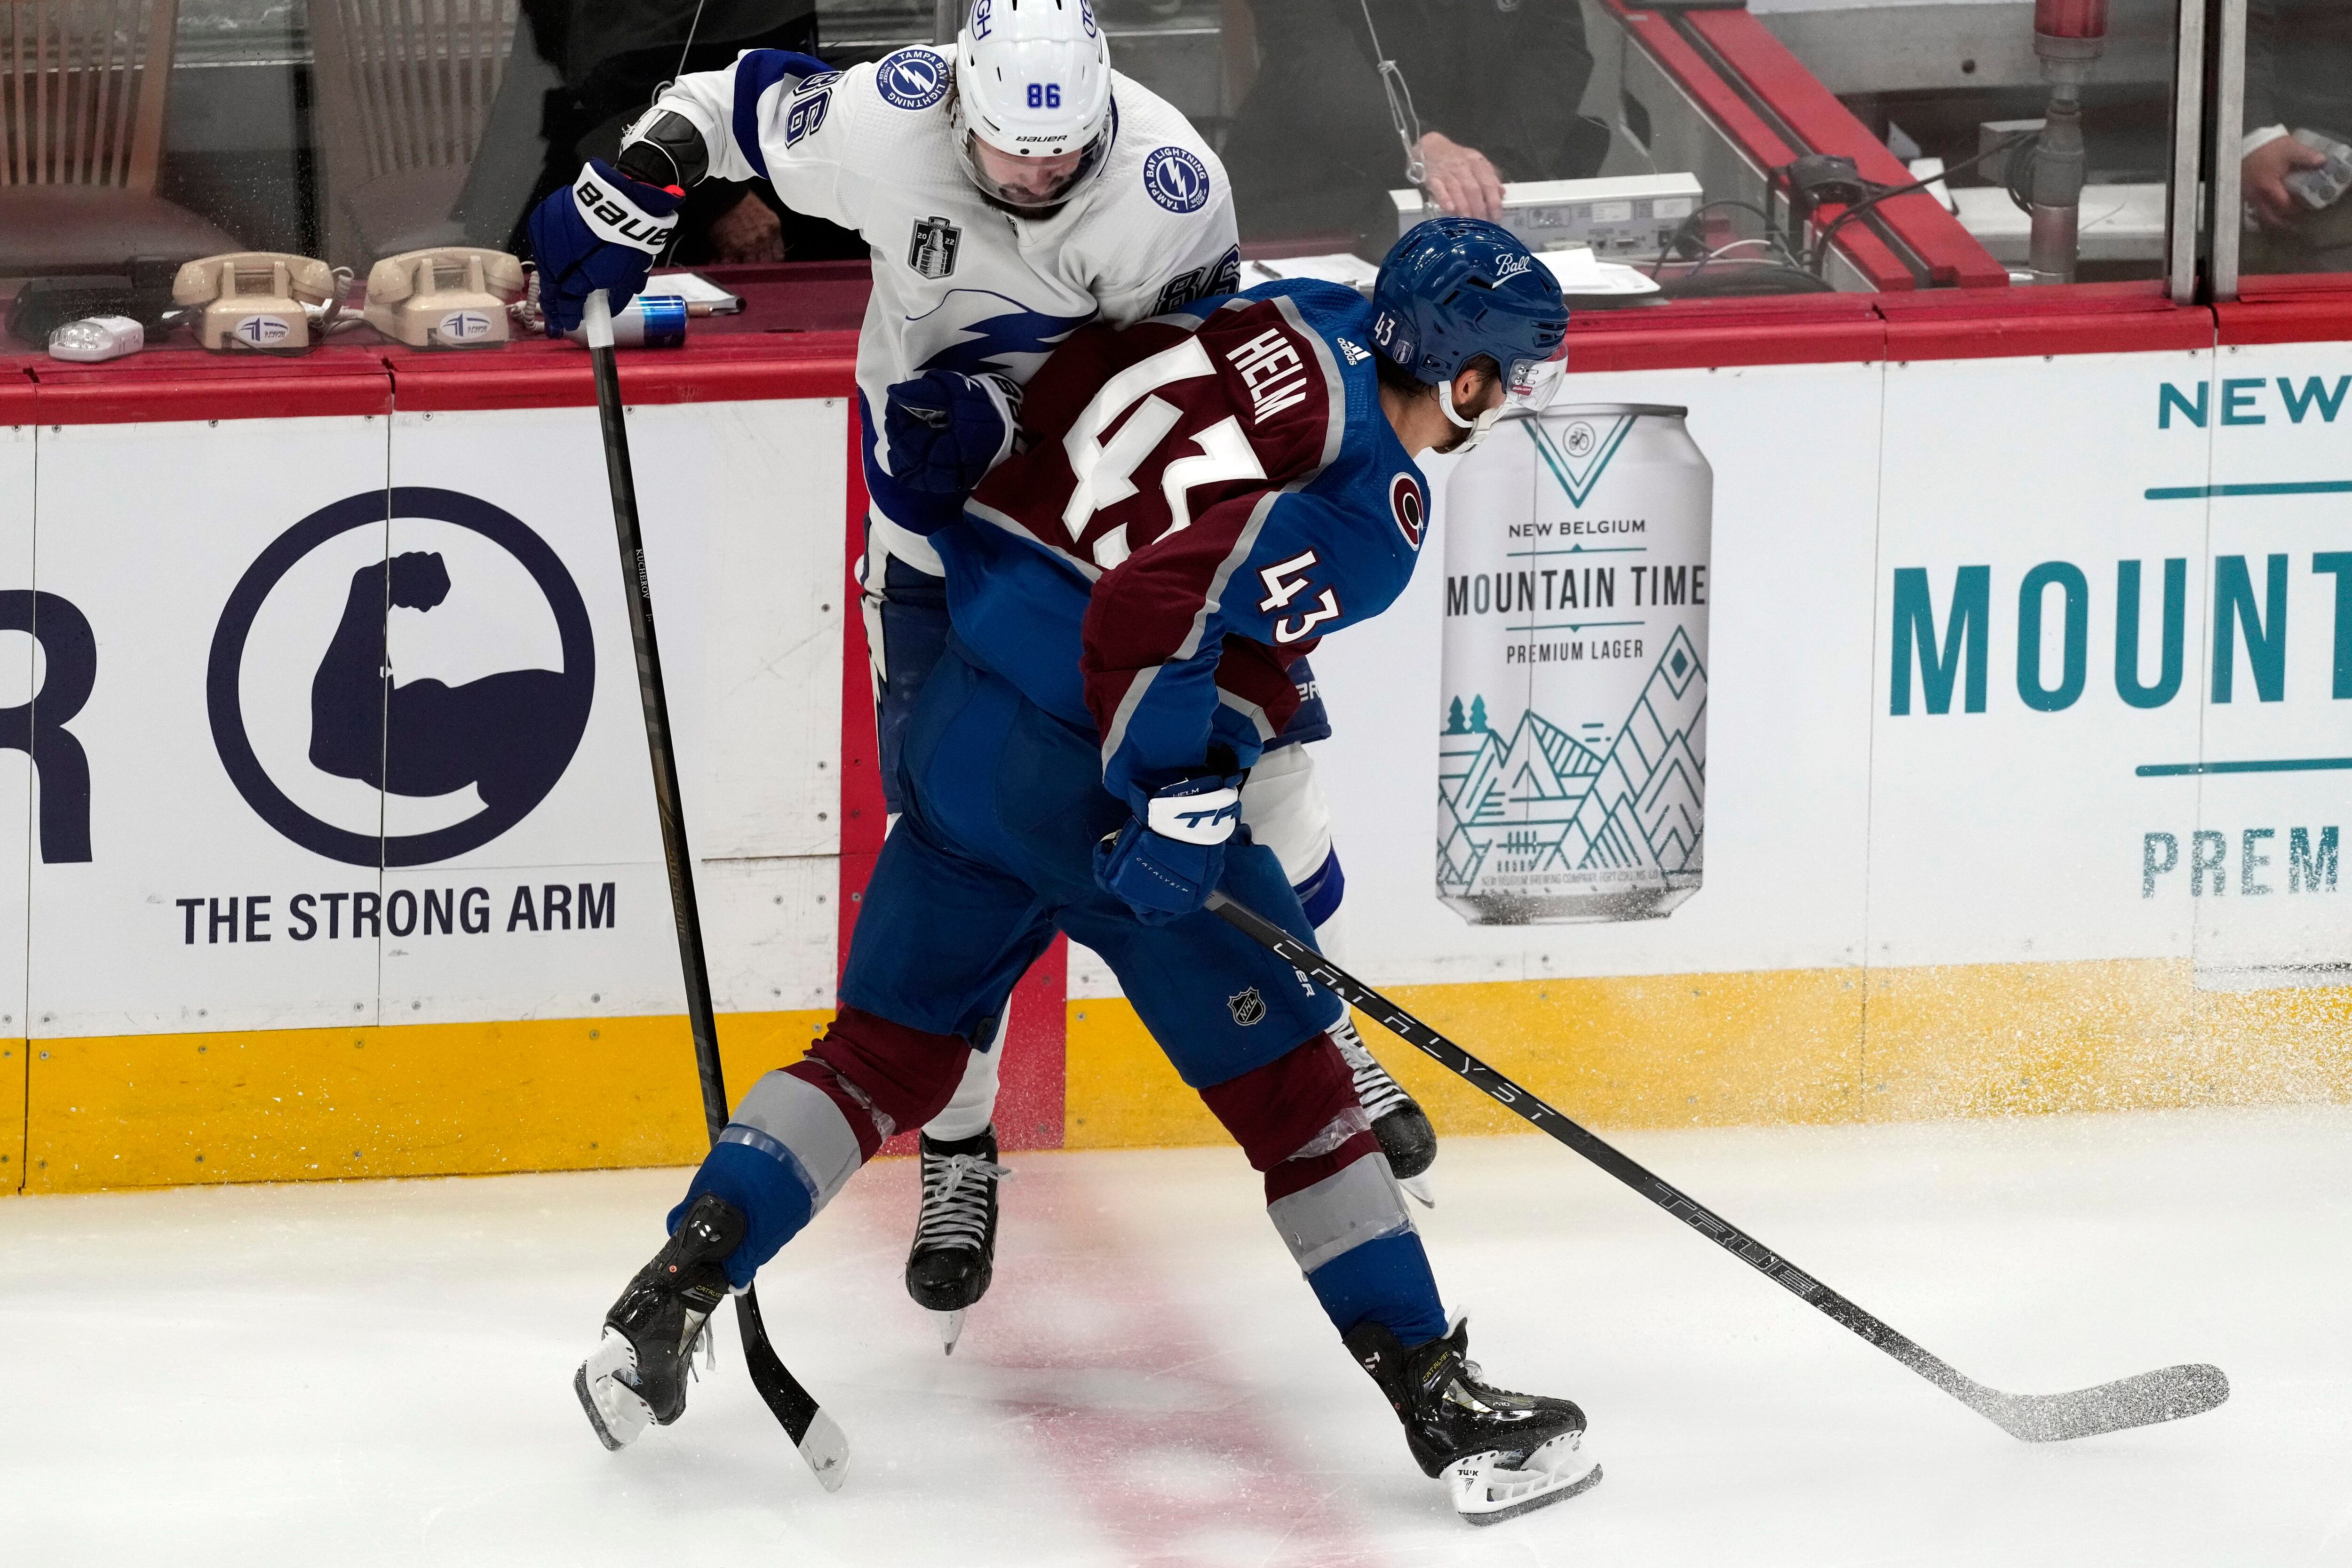 Colorado Avalanche: Who Should the Avalanche Play While Wearing the  Nordiques Uniforms?